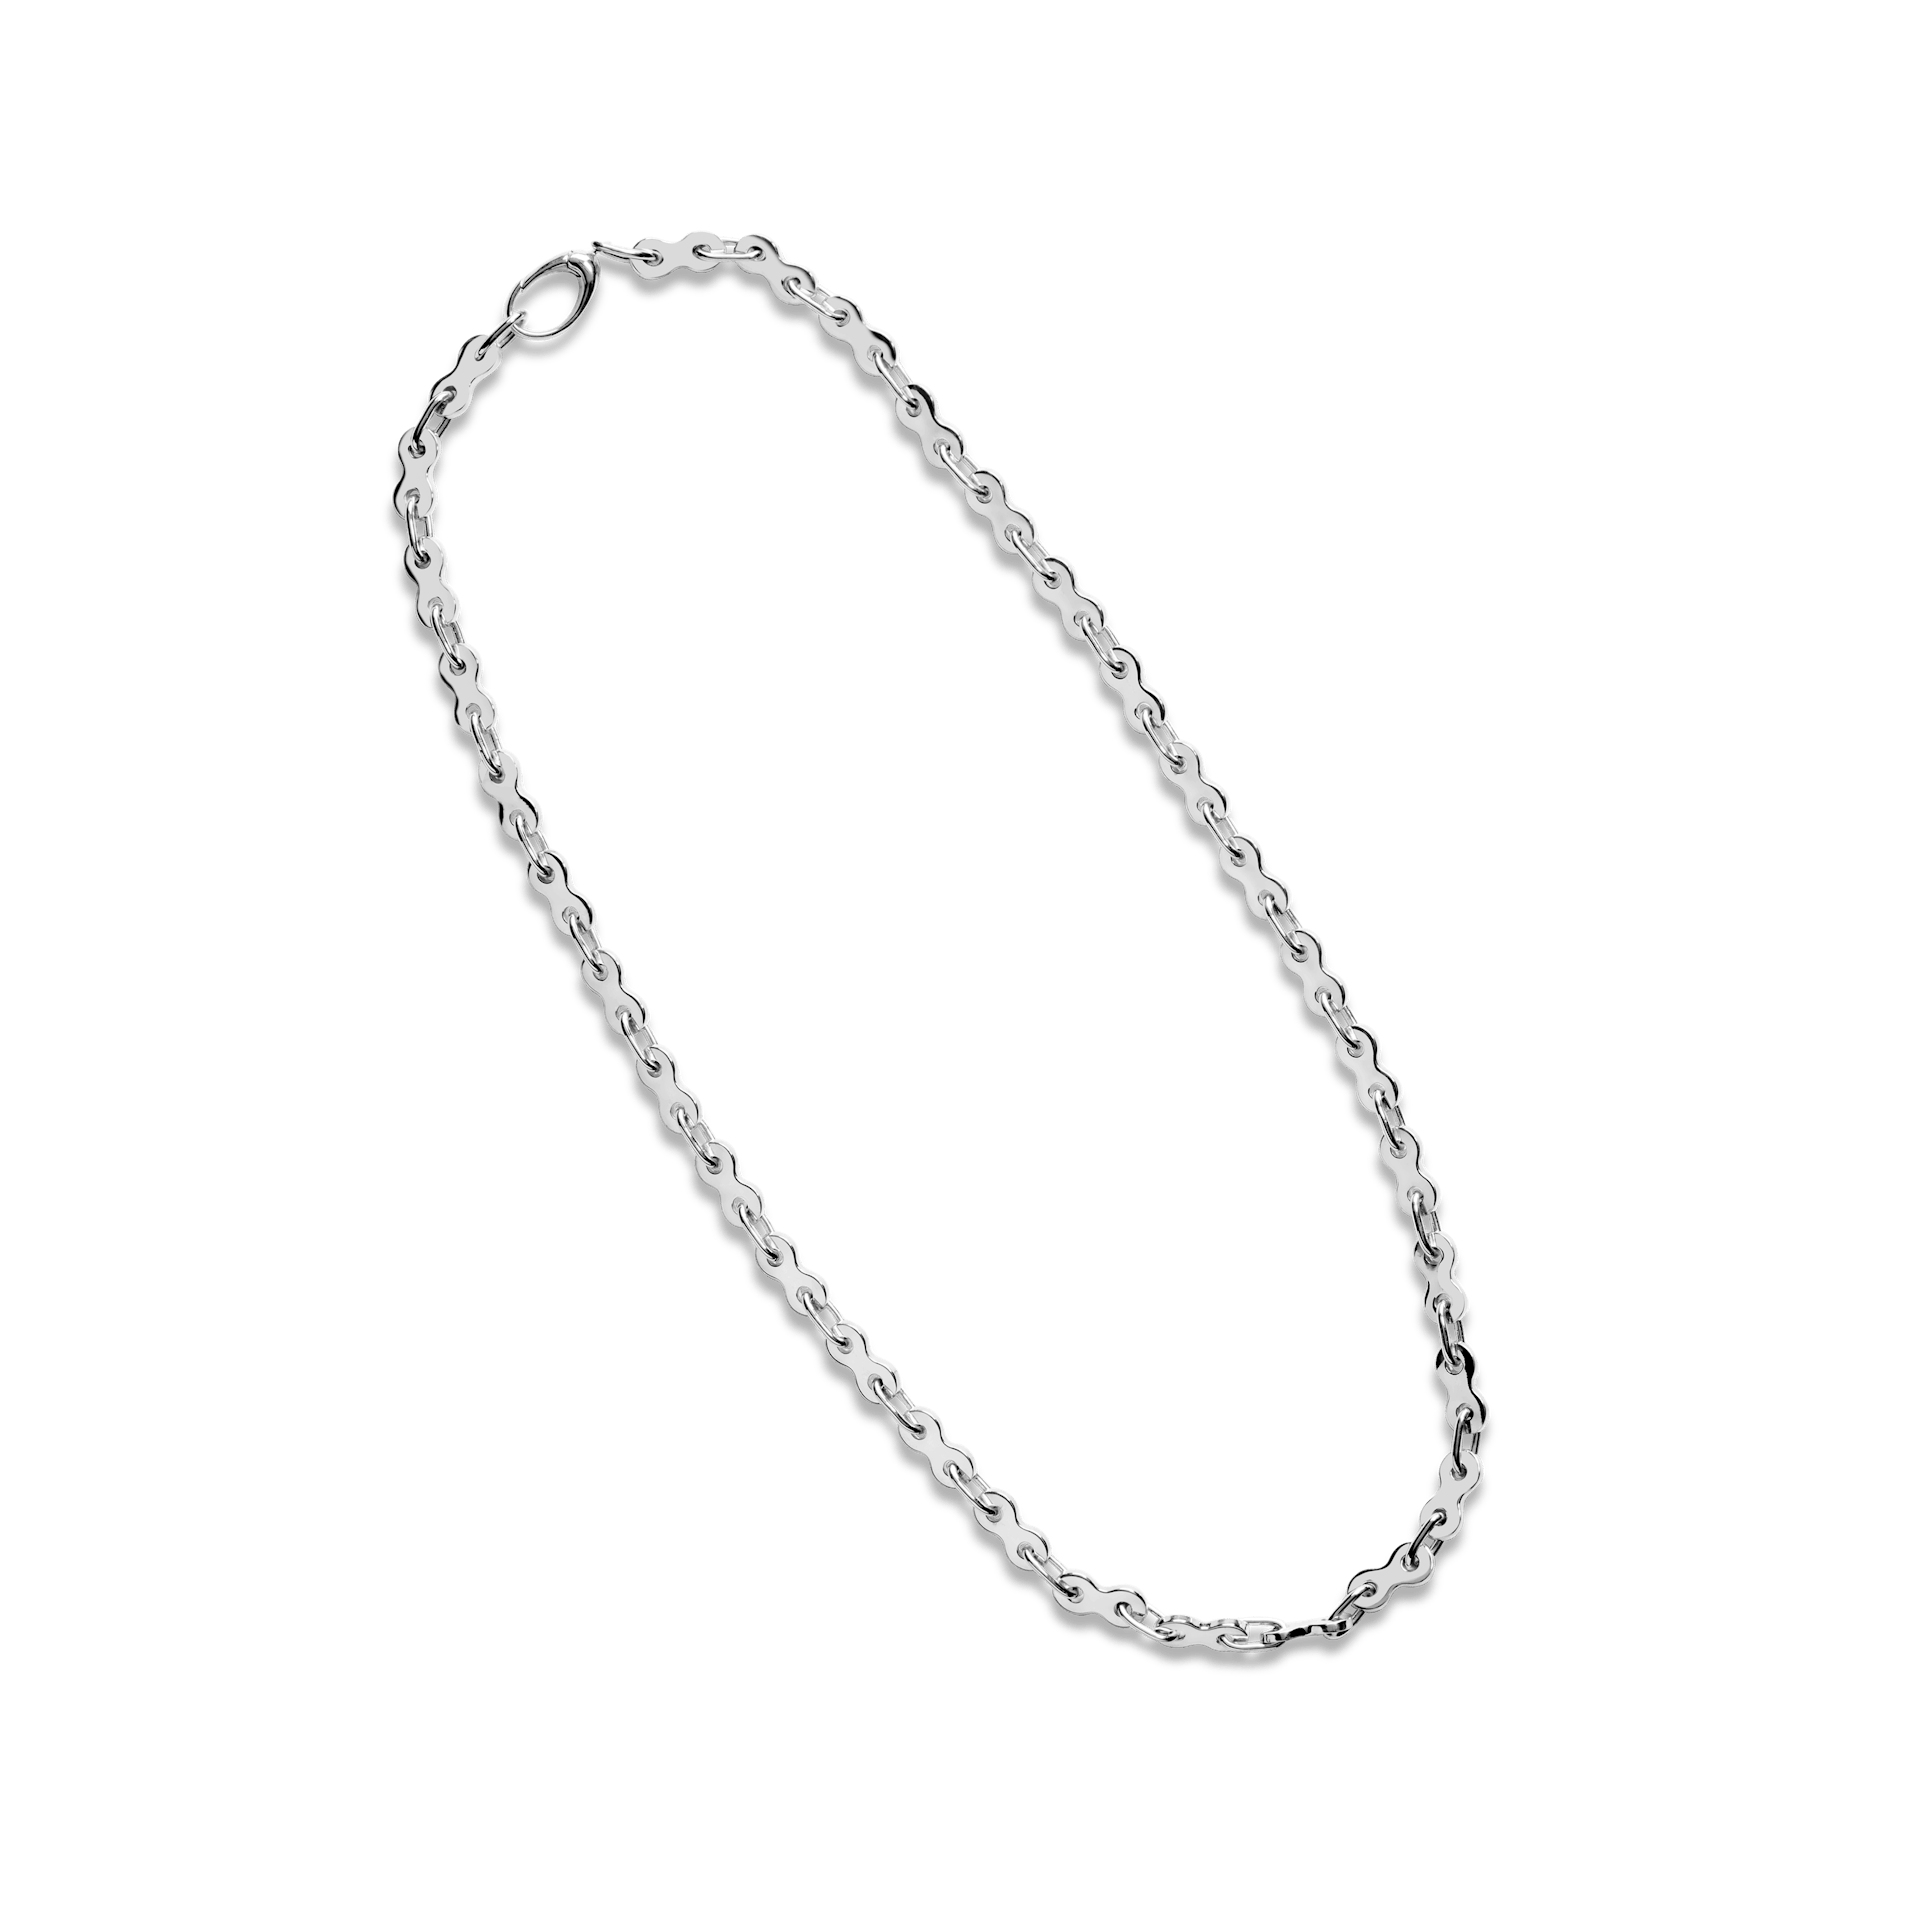 Bike Chain Link Necklace